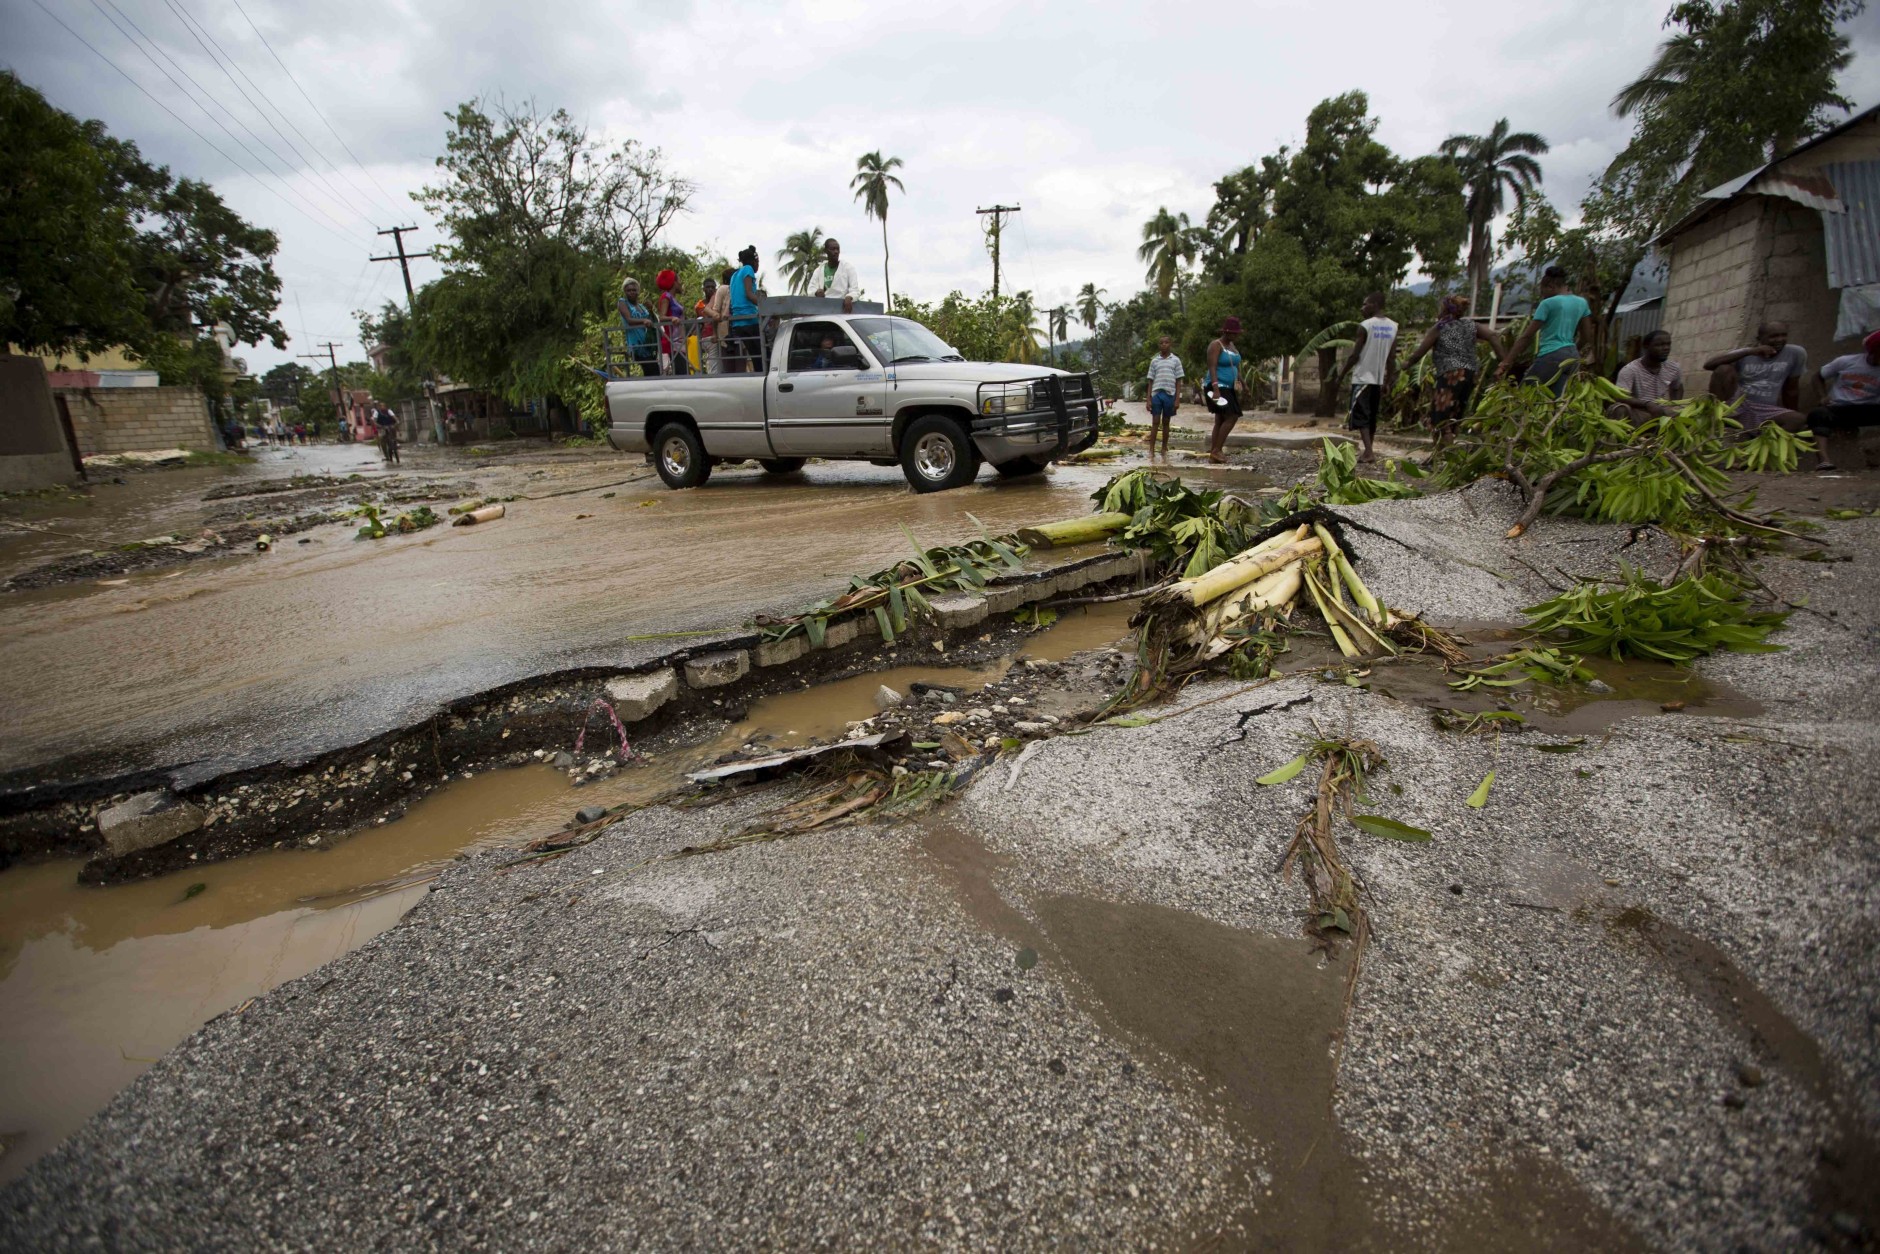 A truck negotiates a road damaged by Hurricane Matthew, in Petit Goave, Haiti, Wednesday, Oct. 5, 2016. Rescue workers in Haiti struggled to reach cutoff towns and learn the full extent of the death and destruction caused by Hurricane Matthew as the storm began battering the Bahamas on Wednesday and triggered large-scale evacuations along the U.S. East Coast. ( AP Photo/Dieu Nalio Chery)